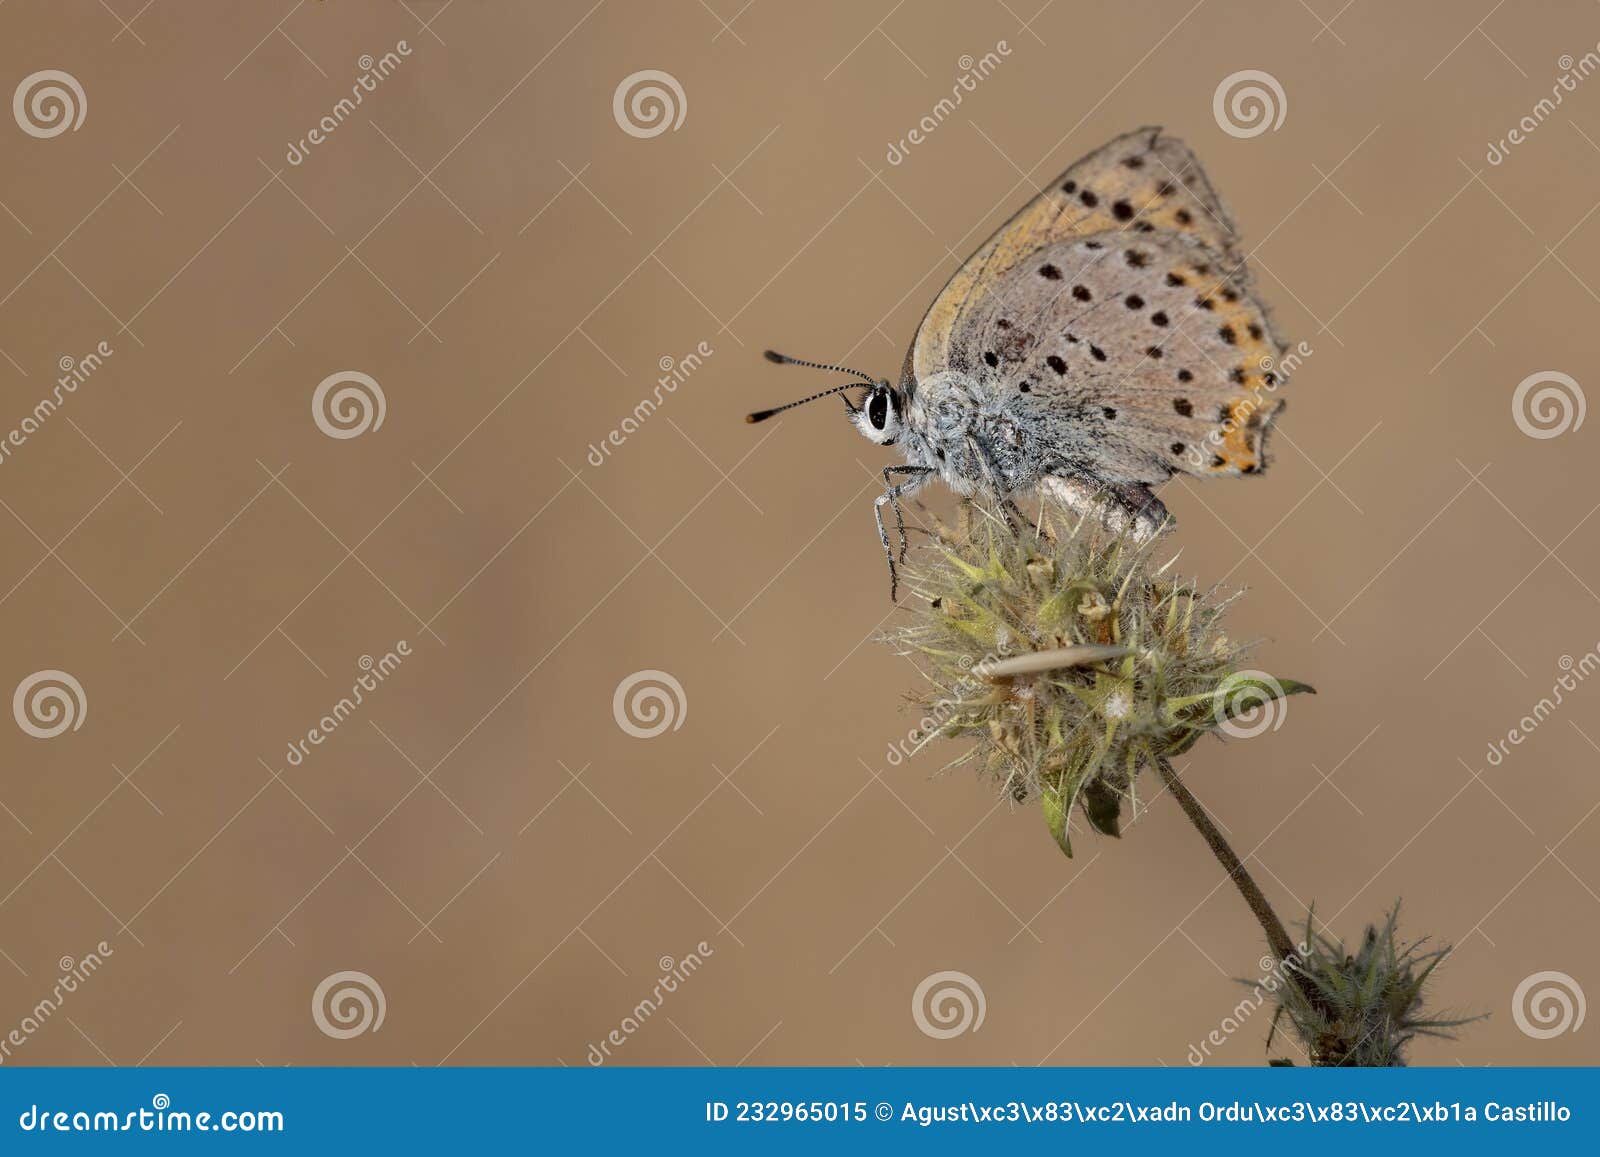 day butterfly perched on flower, lycaena alciphron,